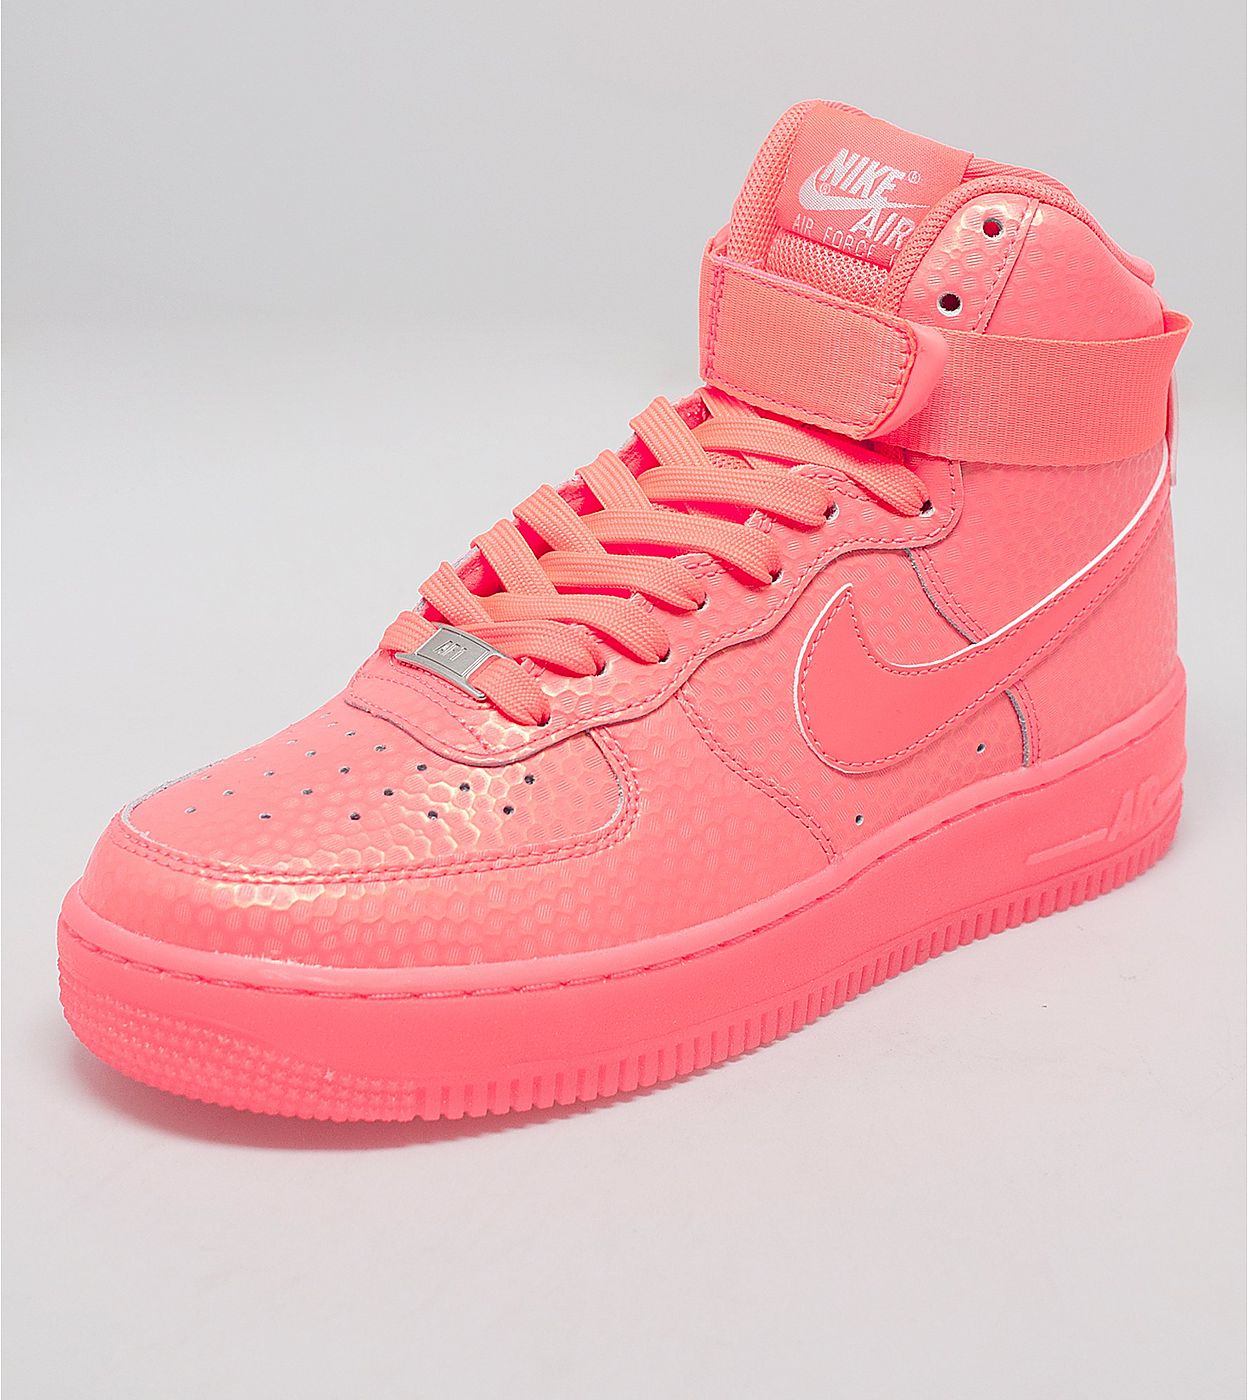 nike women's air force one shoes